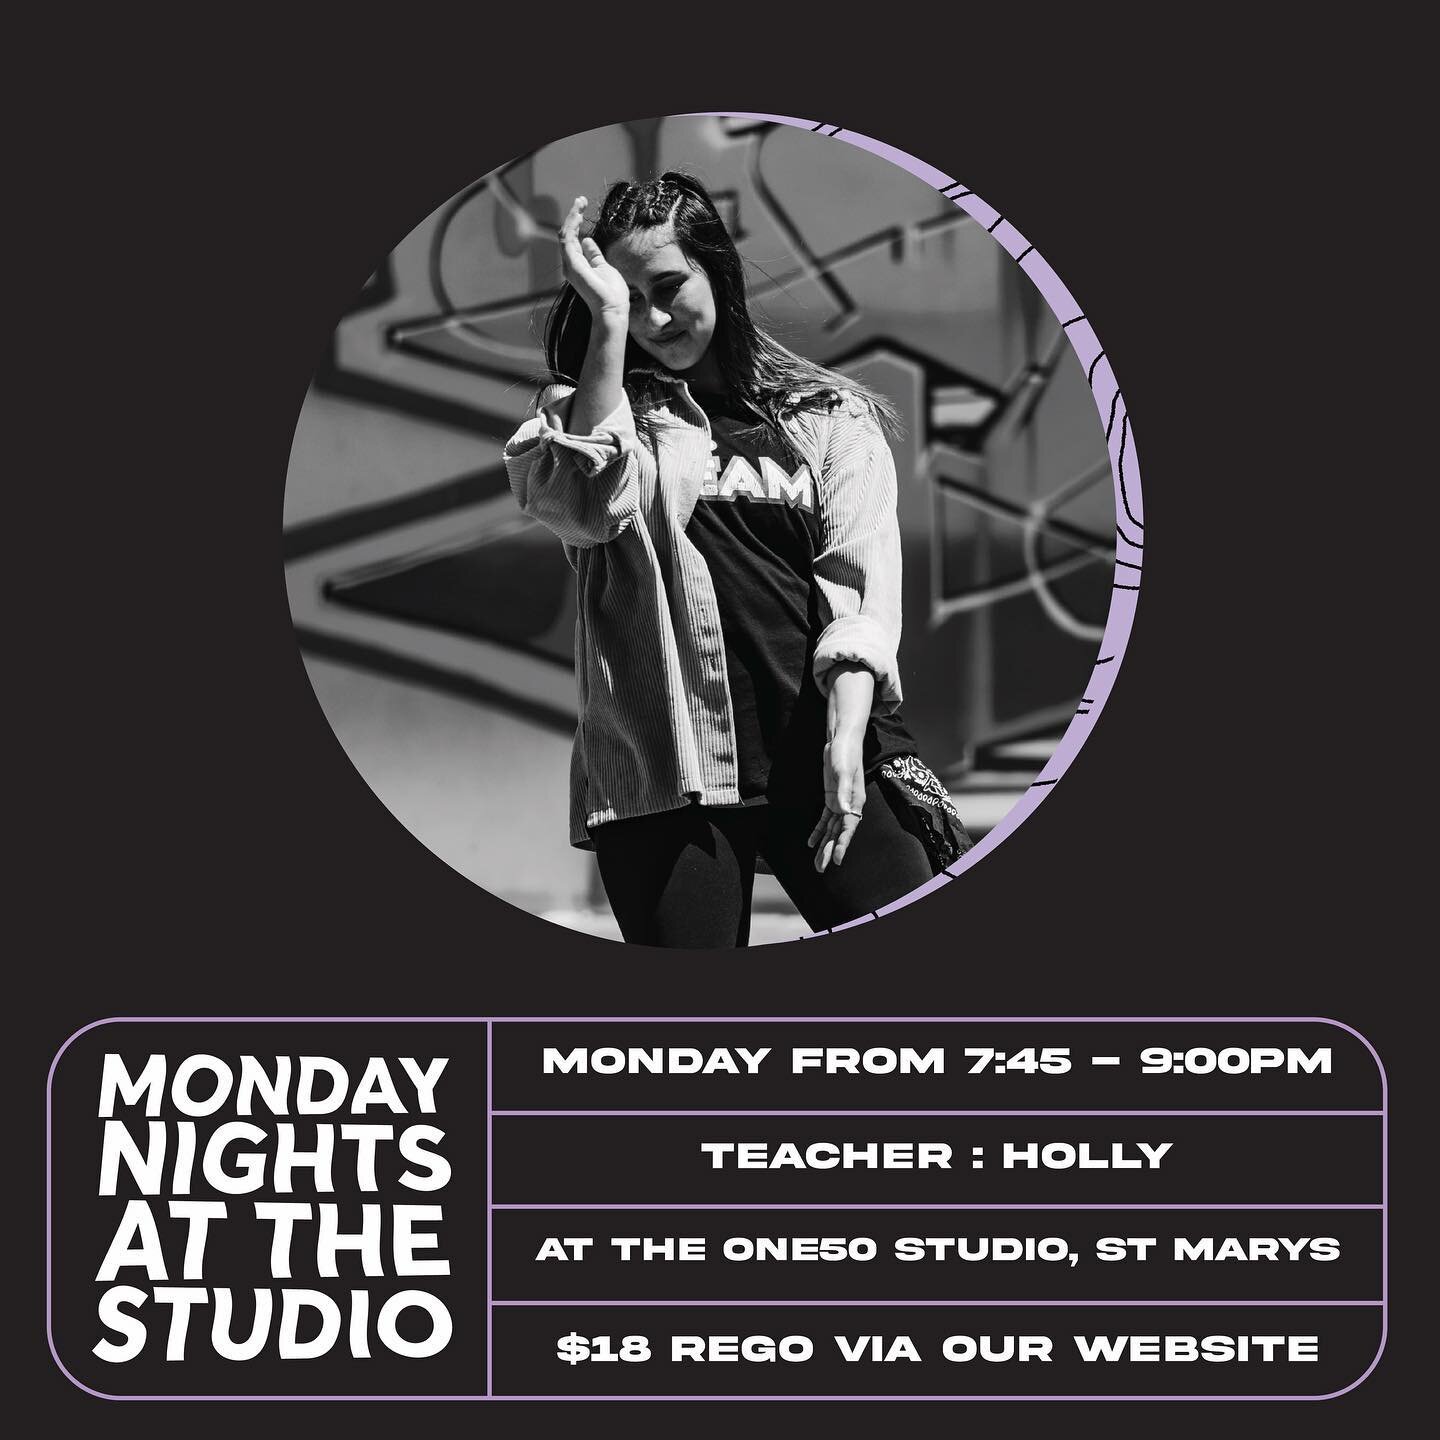 Tomorrow night, at the Studio.

Come and join our open Monday Nights at the Studio workshop with Holly taking choreography this week. 
These classes are an amazing opportunity to learn a challenging, fun and exciting set with no pressure to remember 